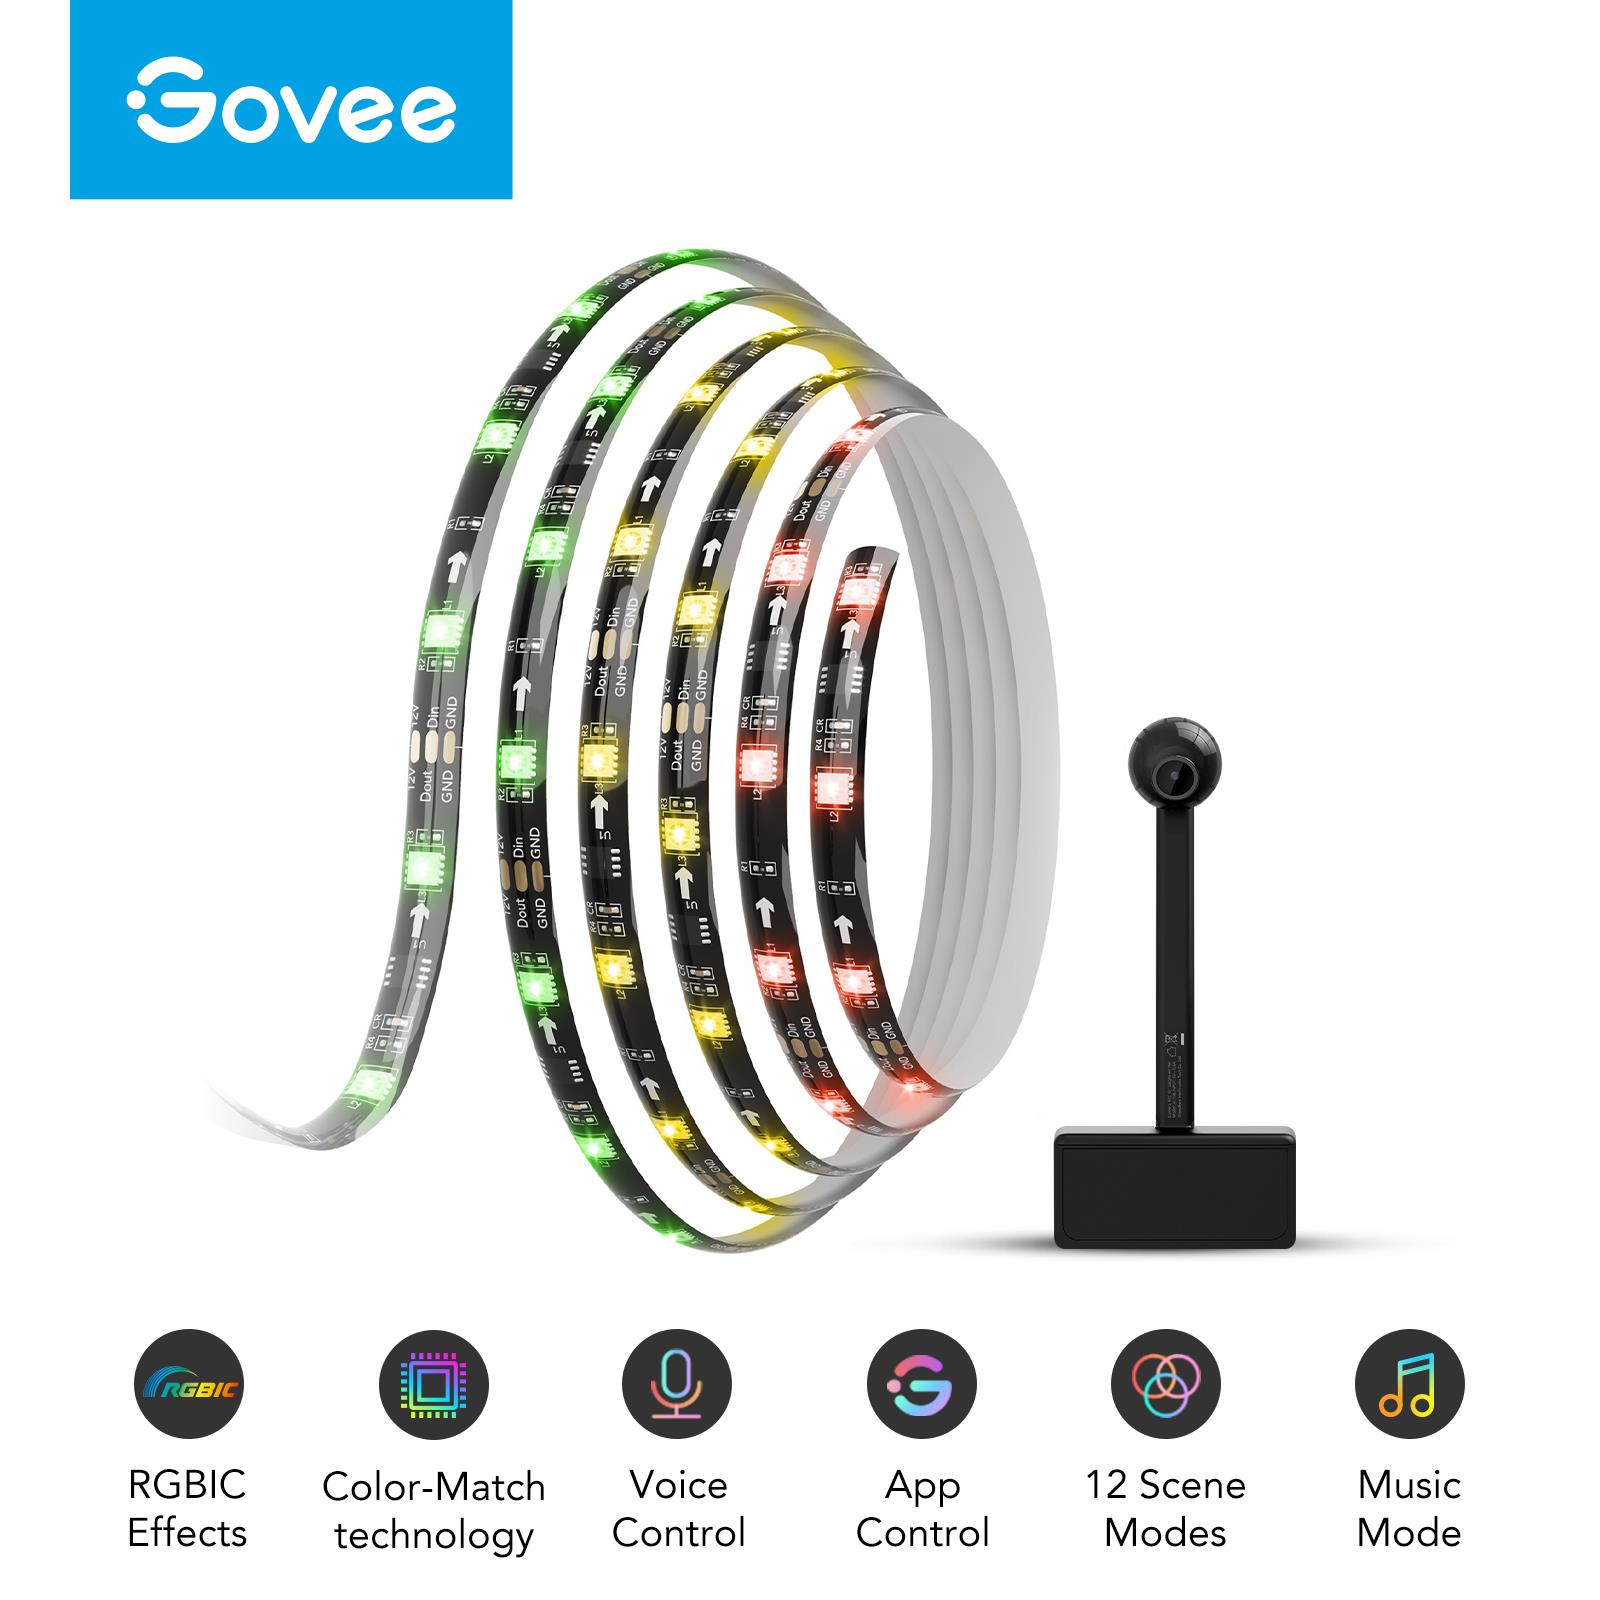 Govee DreamView T1 TV Backlight - Govee